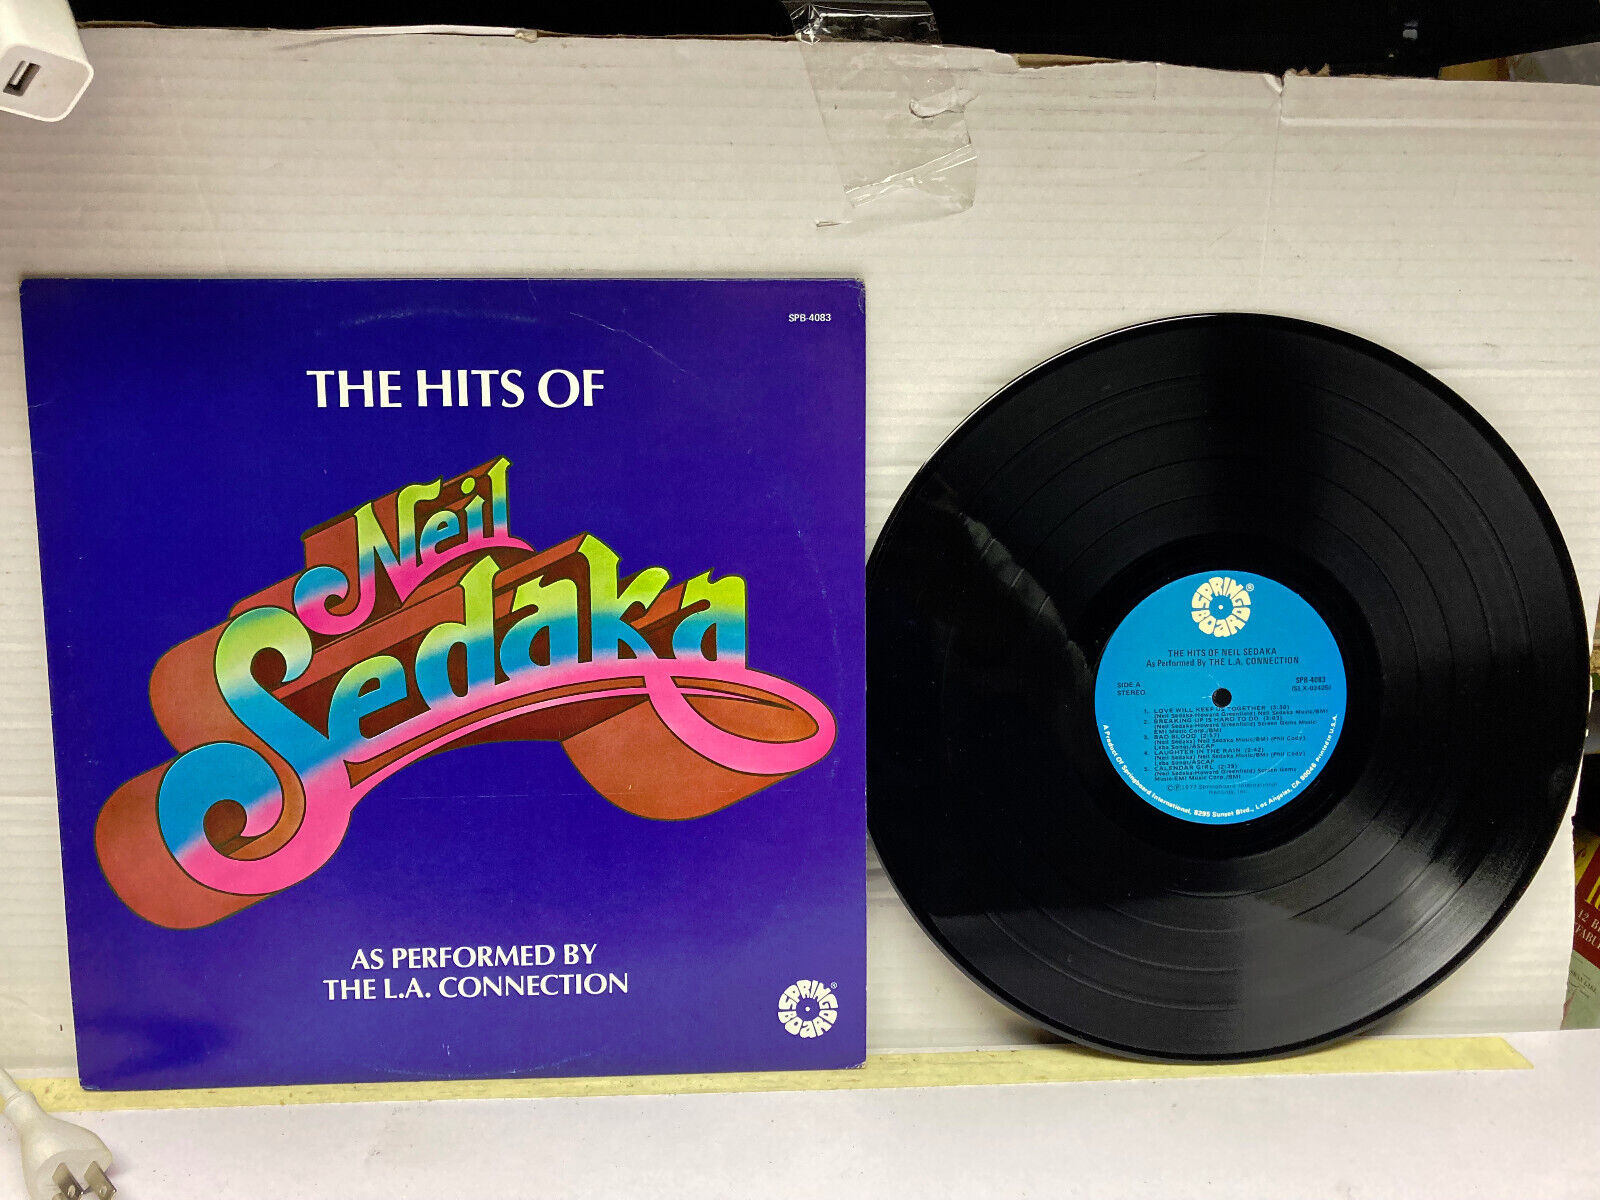 The Hits of Neil Sedaka - As Performed By The L.A. Connection , Record 12" VG